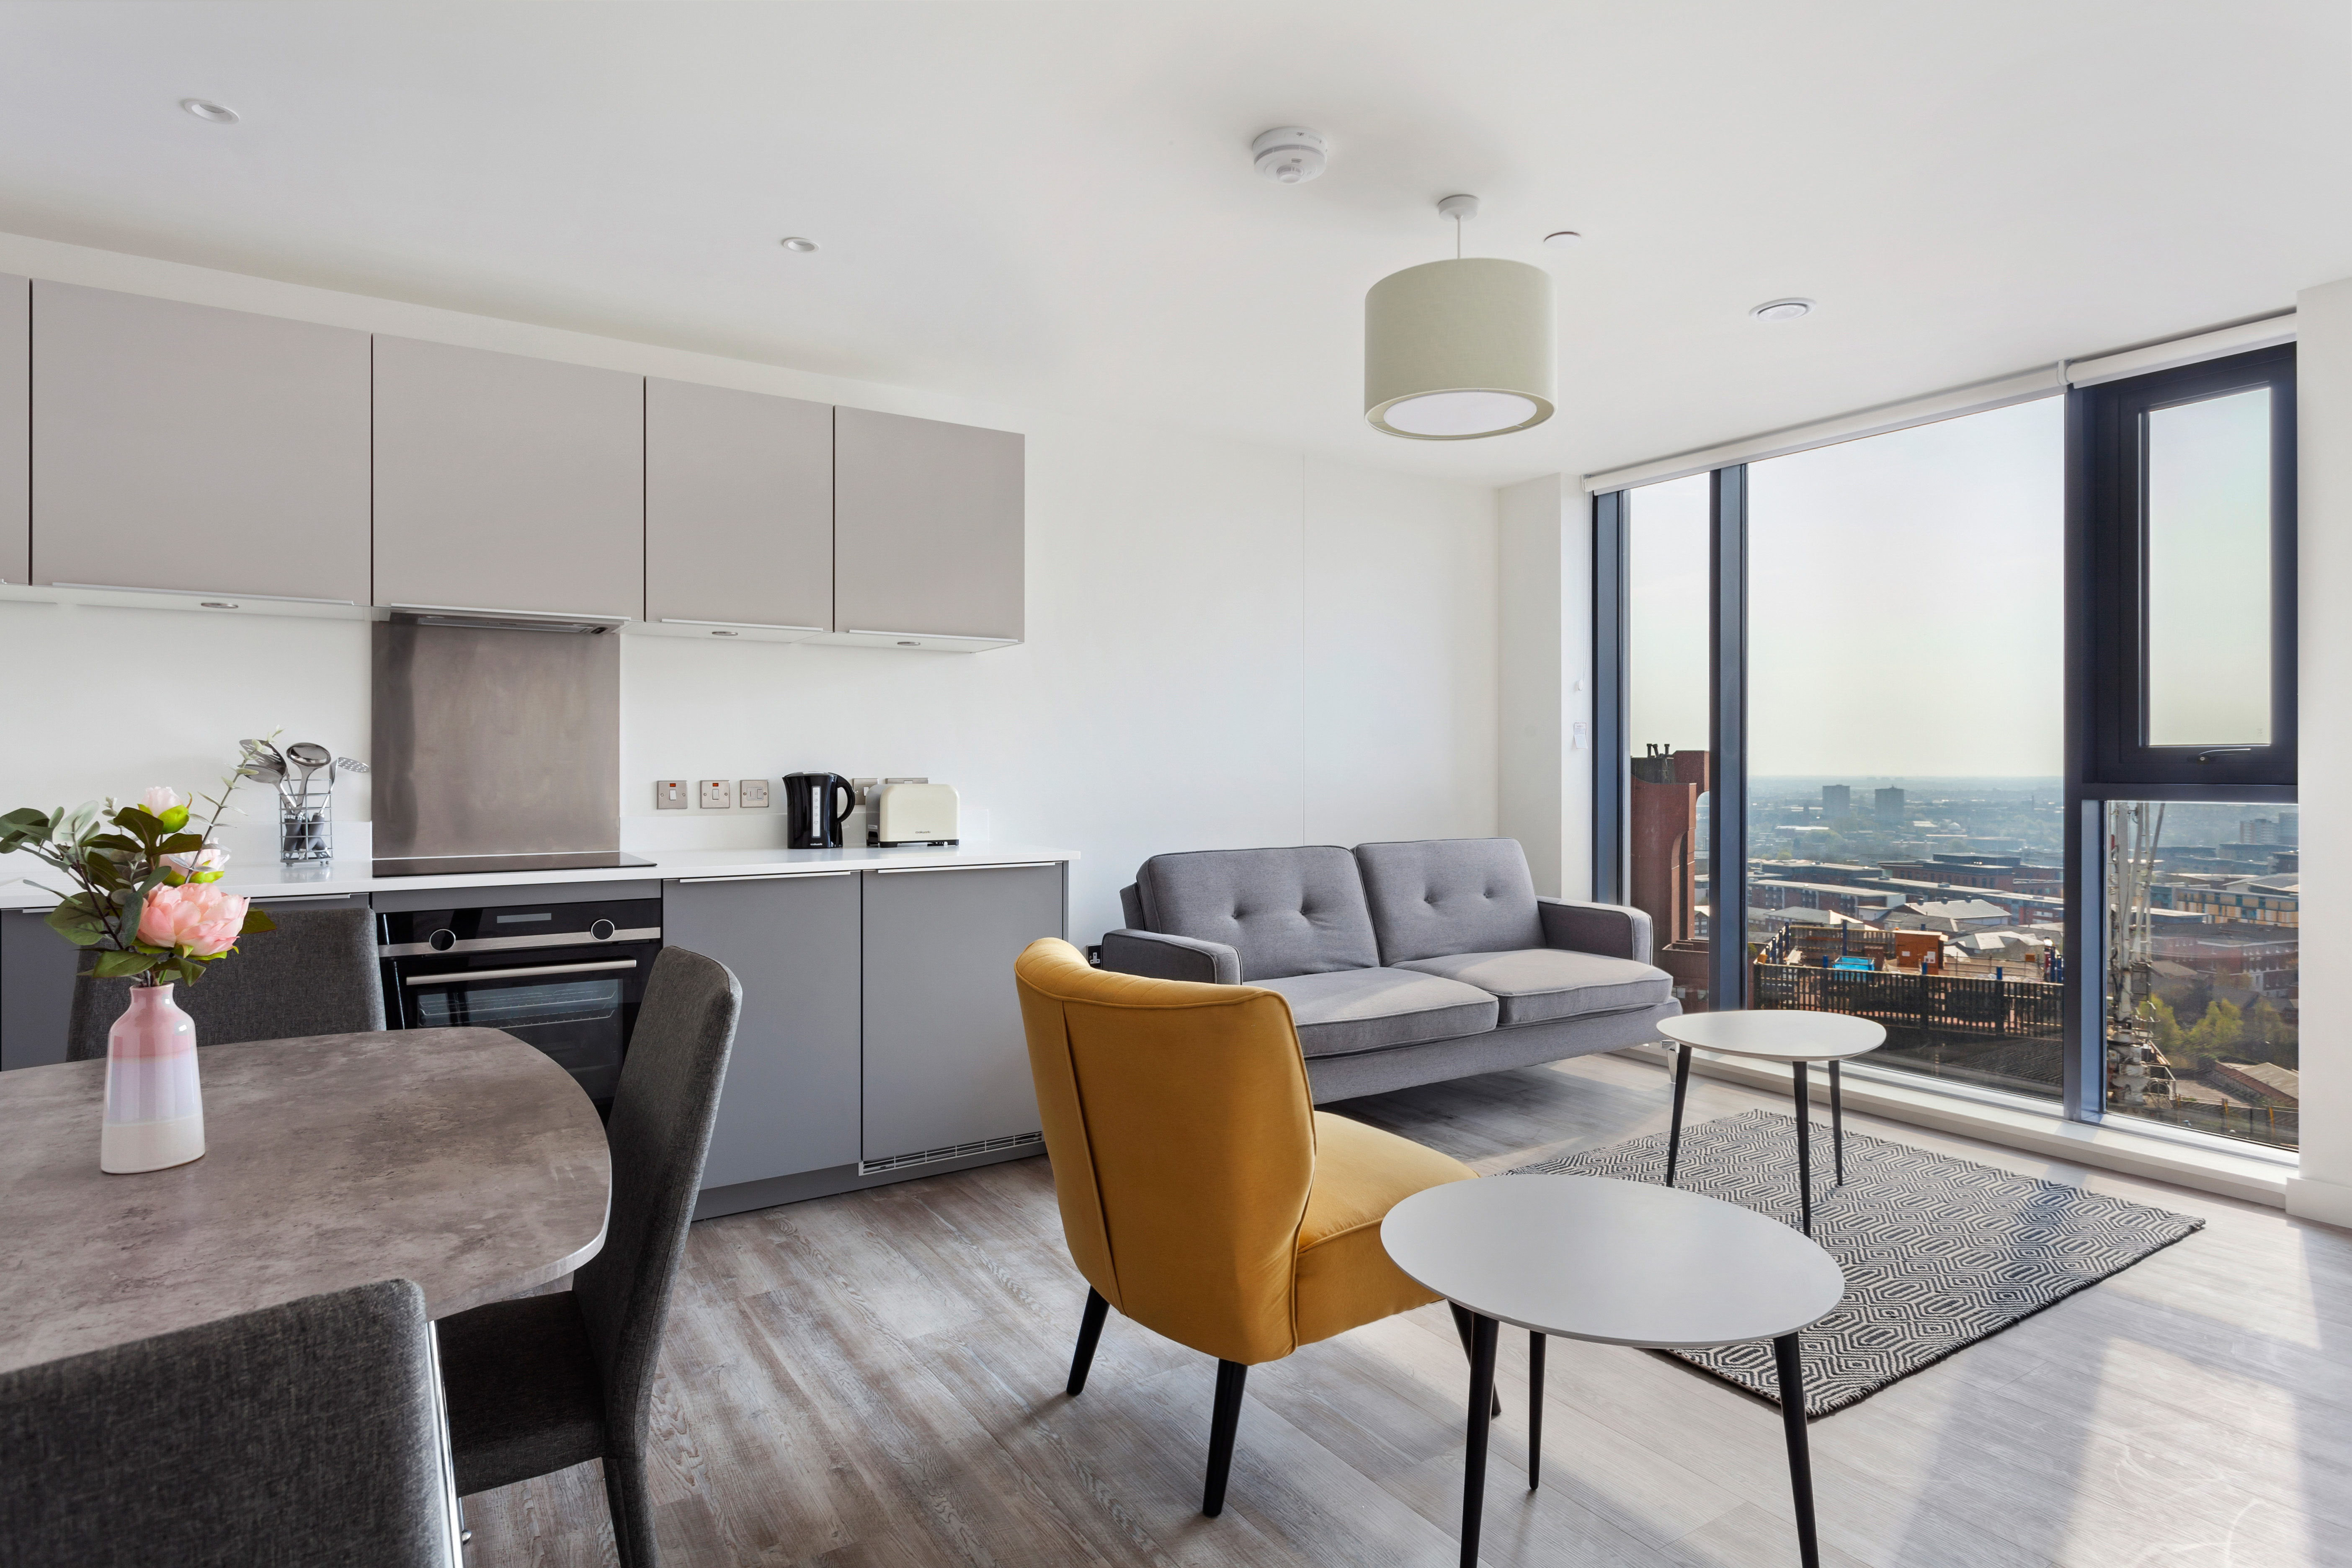 Property Image 1 - Modern and Stylish 1BR Apartment with Amazing Views